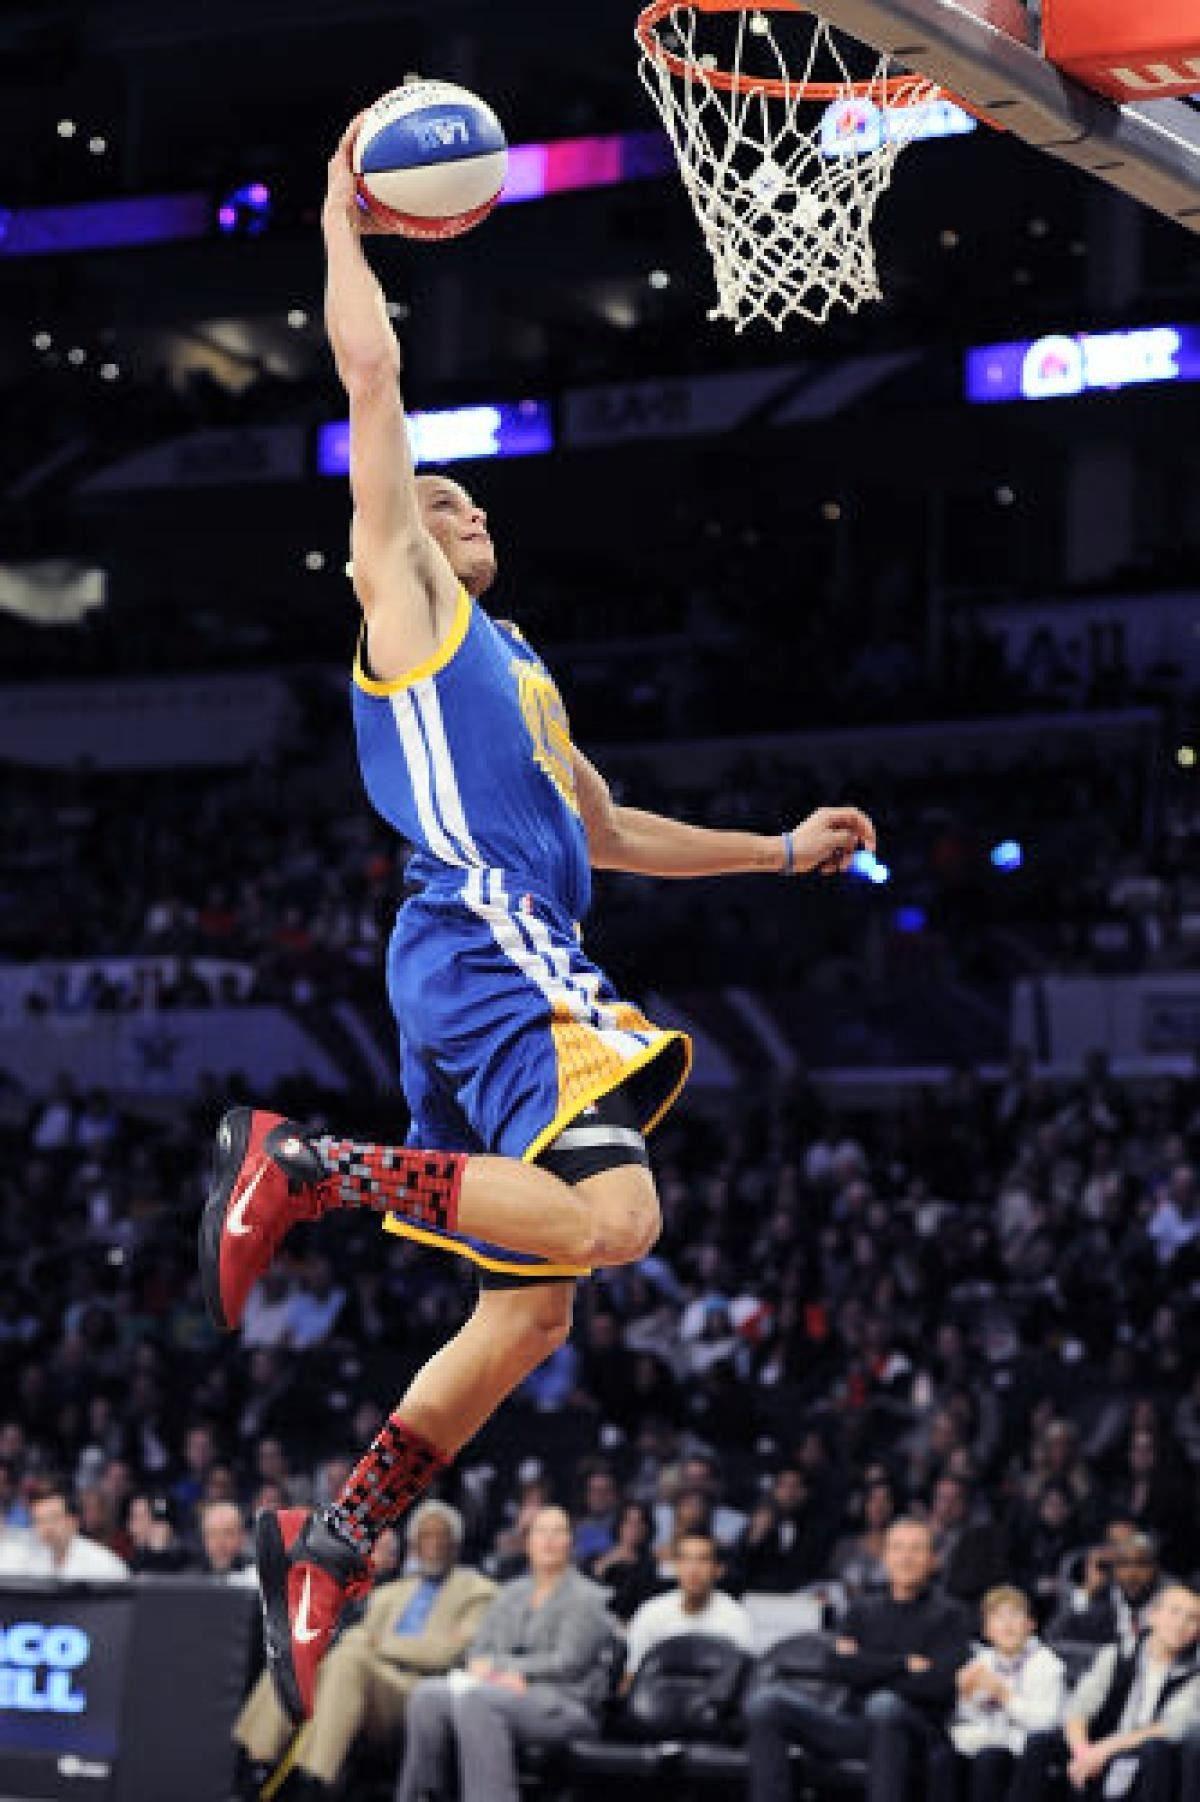 1200 x 1802 · jpeg - Image result for stephen curry dunk | Stephen curry, Stephen curry dunk ...